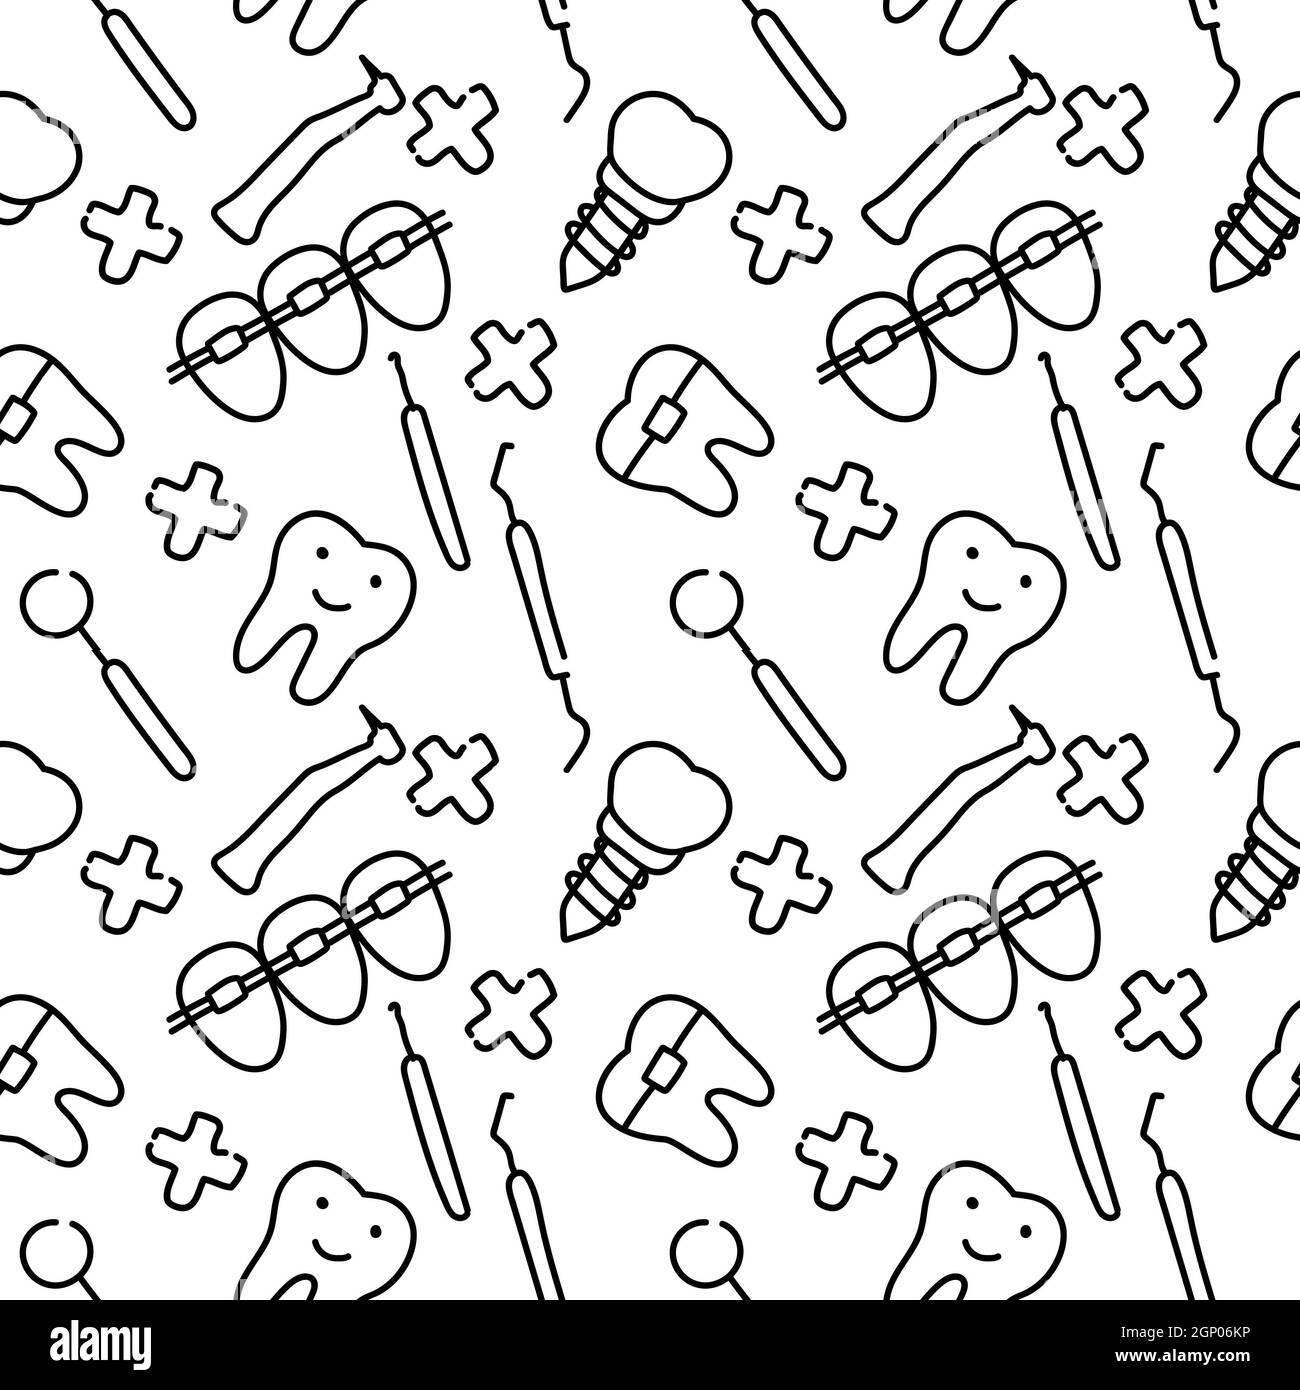 Dental care, Orthodontics Seamless Pattern with Line Icons. Dentist, Medical Equipment, Braces, Tooth Prosthesis, Floss, Caries Treatment, Toothpaste. Stock Photo